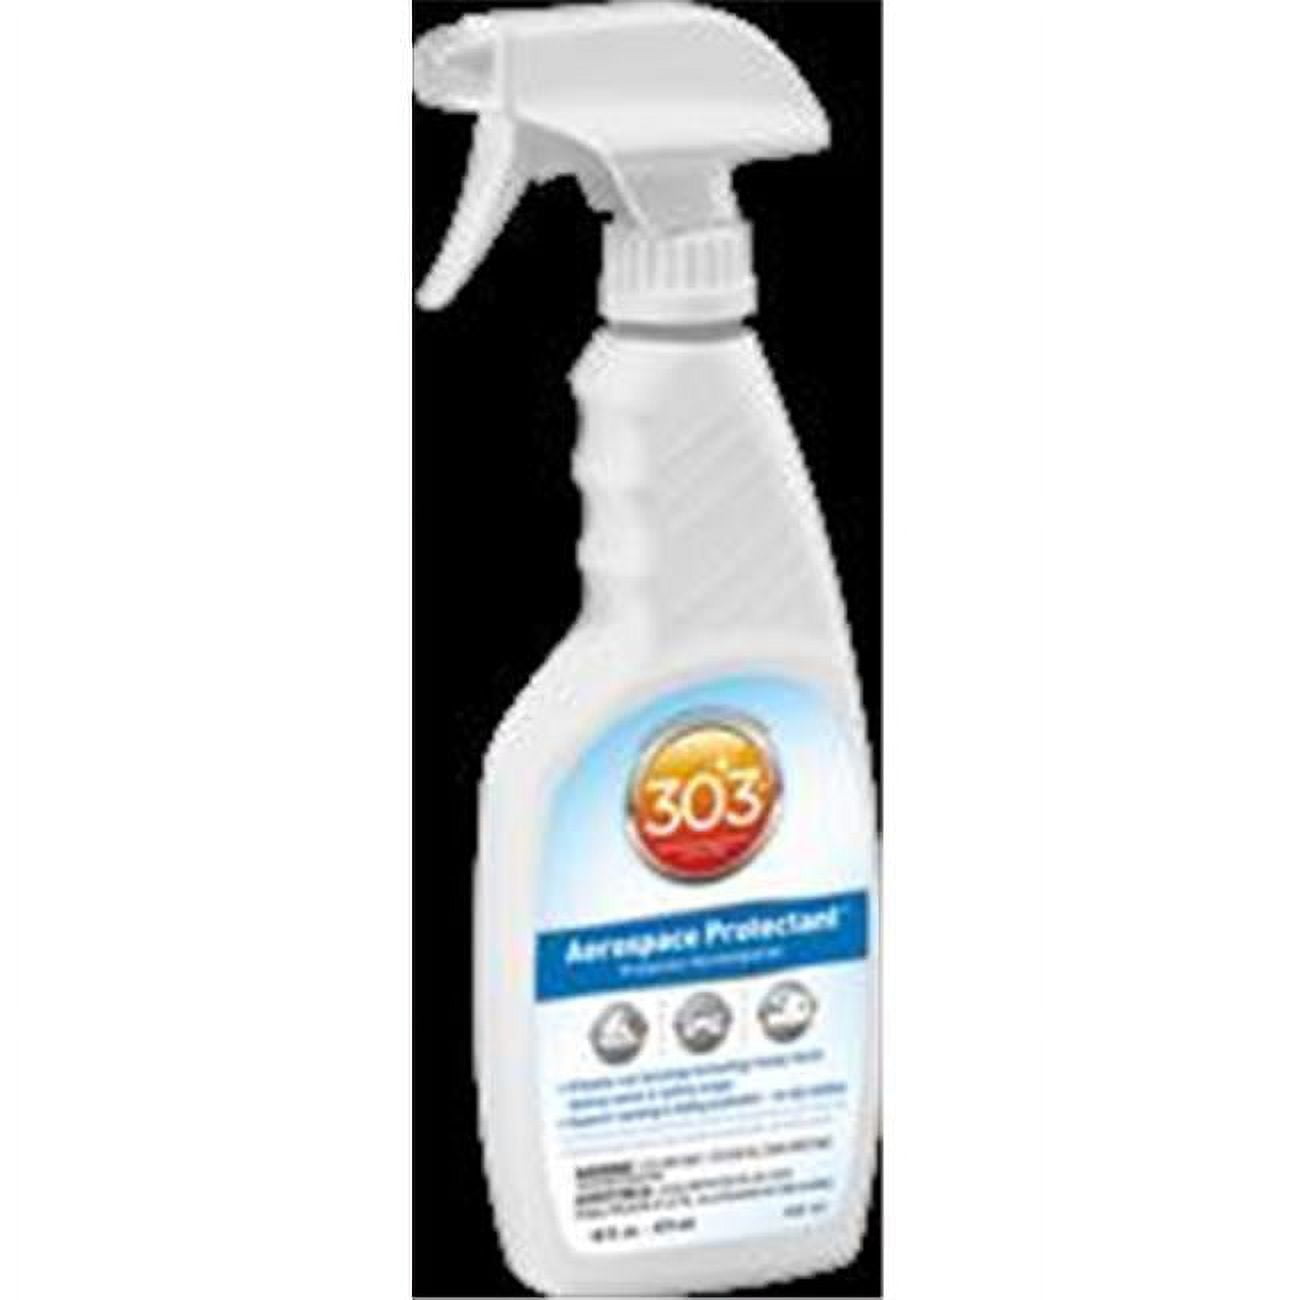 303 Multi-Surface Cleaner (1 Gallon)